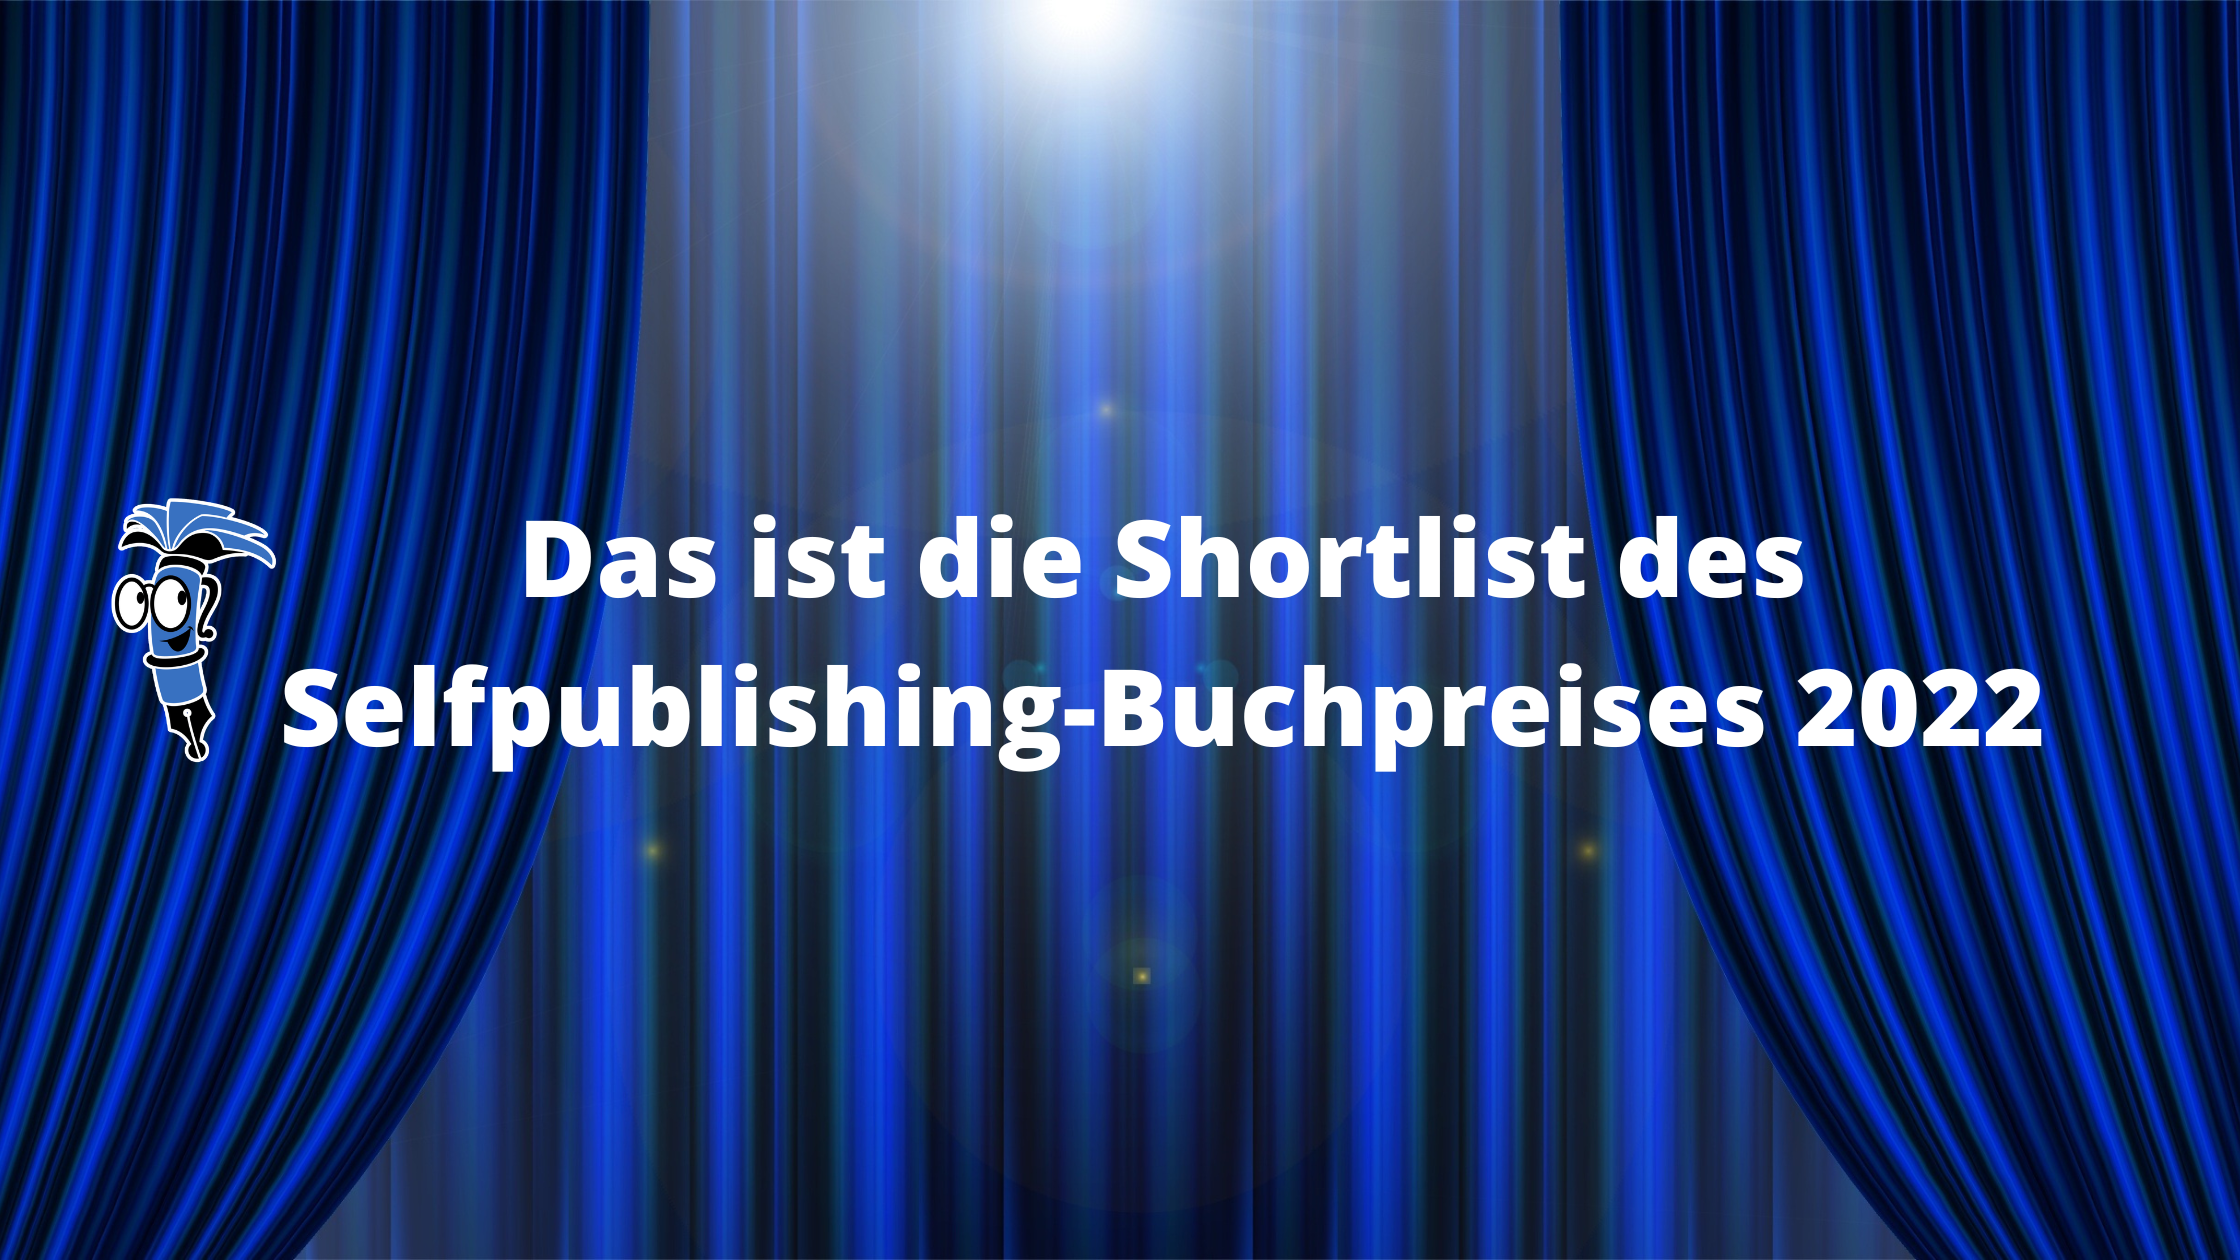 You are currently viewing Das ist Shortlist des Selfpublishing-Buchpreis 2022